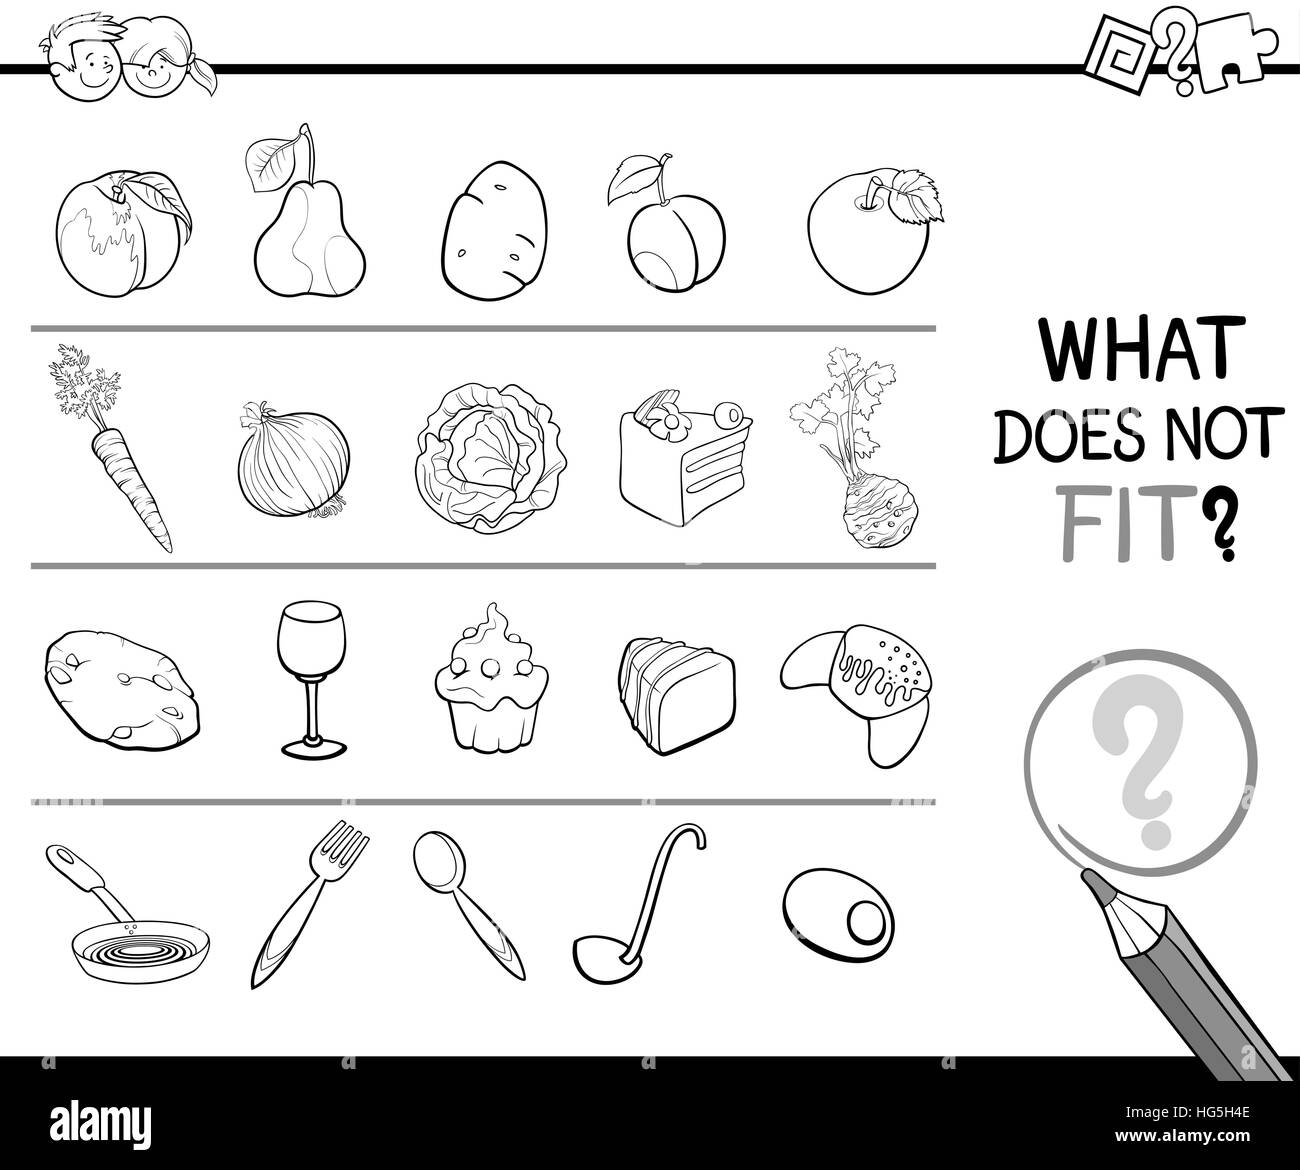 Black and White Cartoon Illustration of Finding Improper Image in the Row Educational Activity for Children with Food Objects Coloring Page Stock Vector